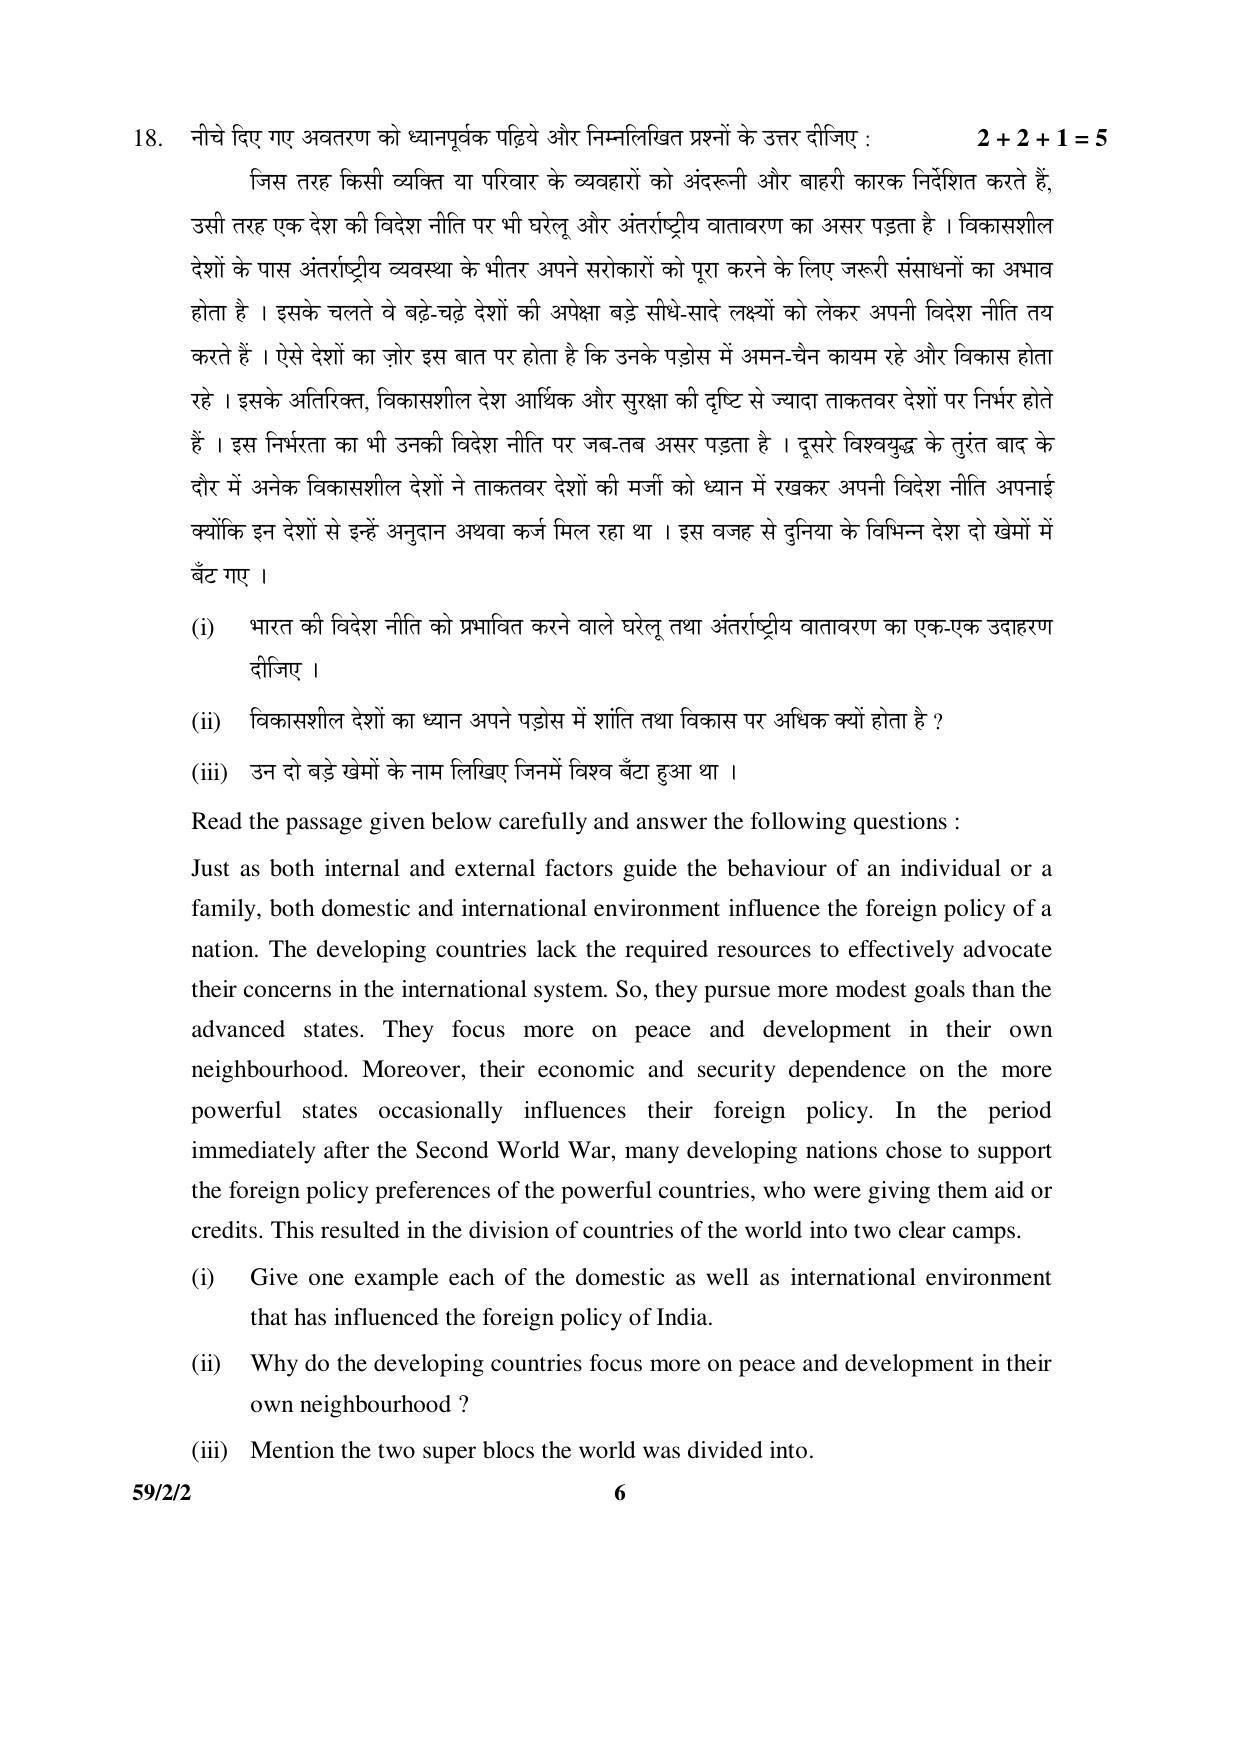 CBSE Class 12 59-2-2 _Political Science 2016 Question Paper - Page 6